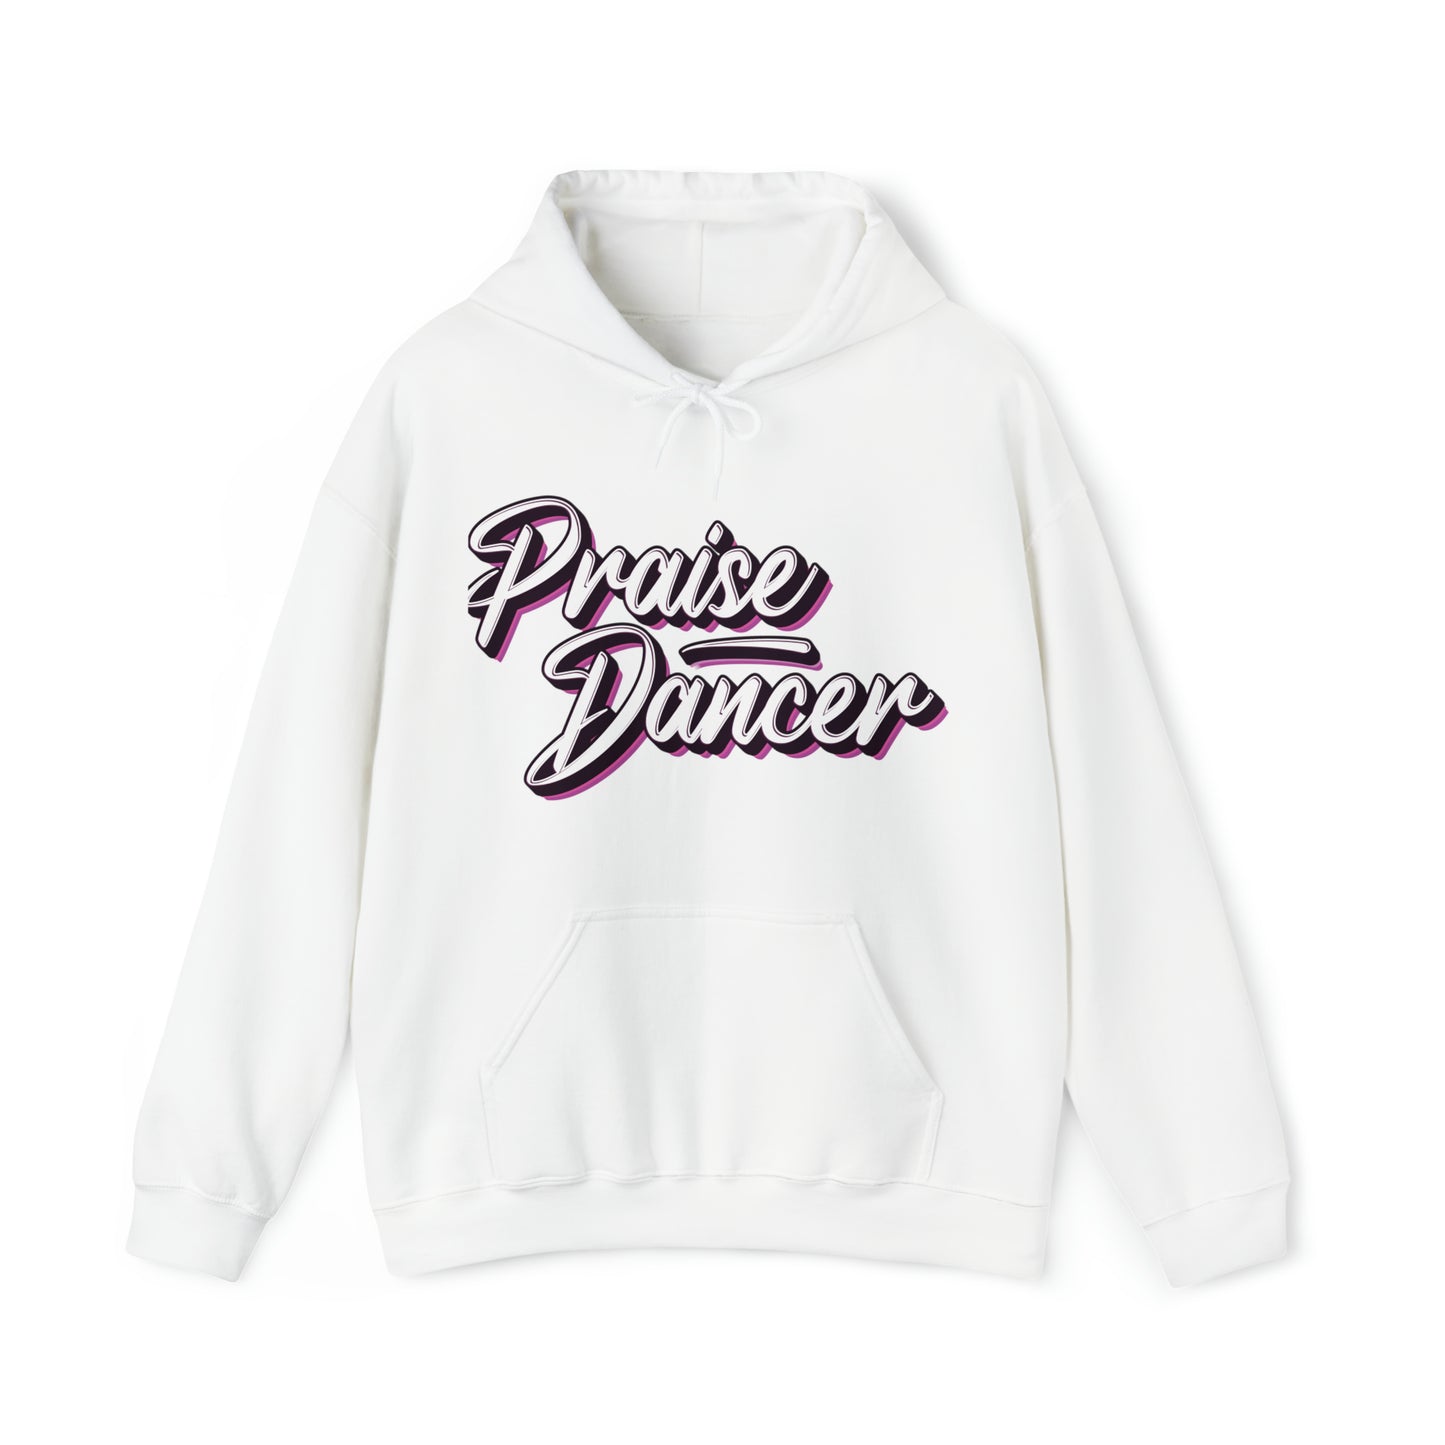 🔥 Unveil Your Passion in Style with the "Praise Dancer"  Hoodie